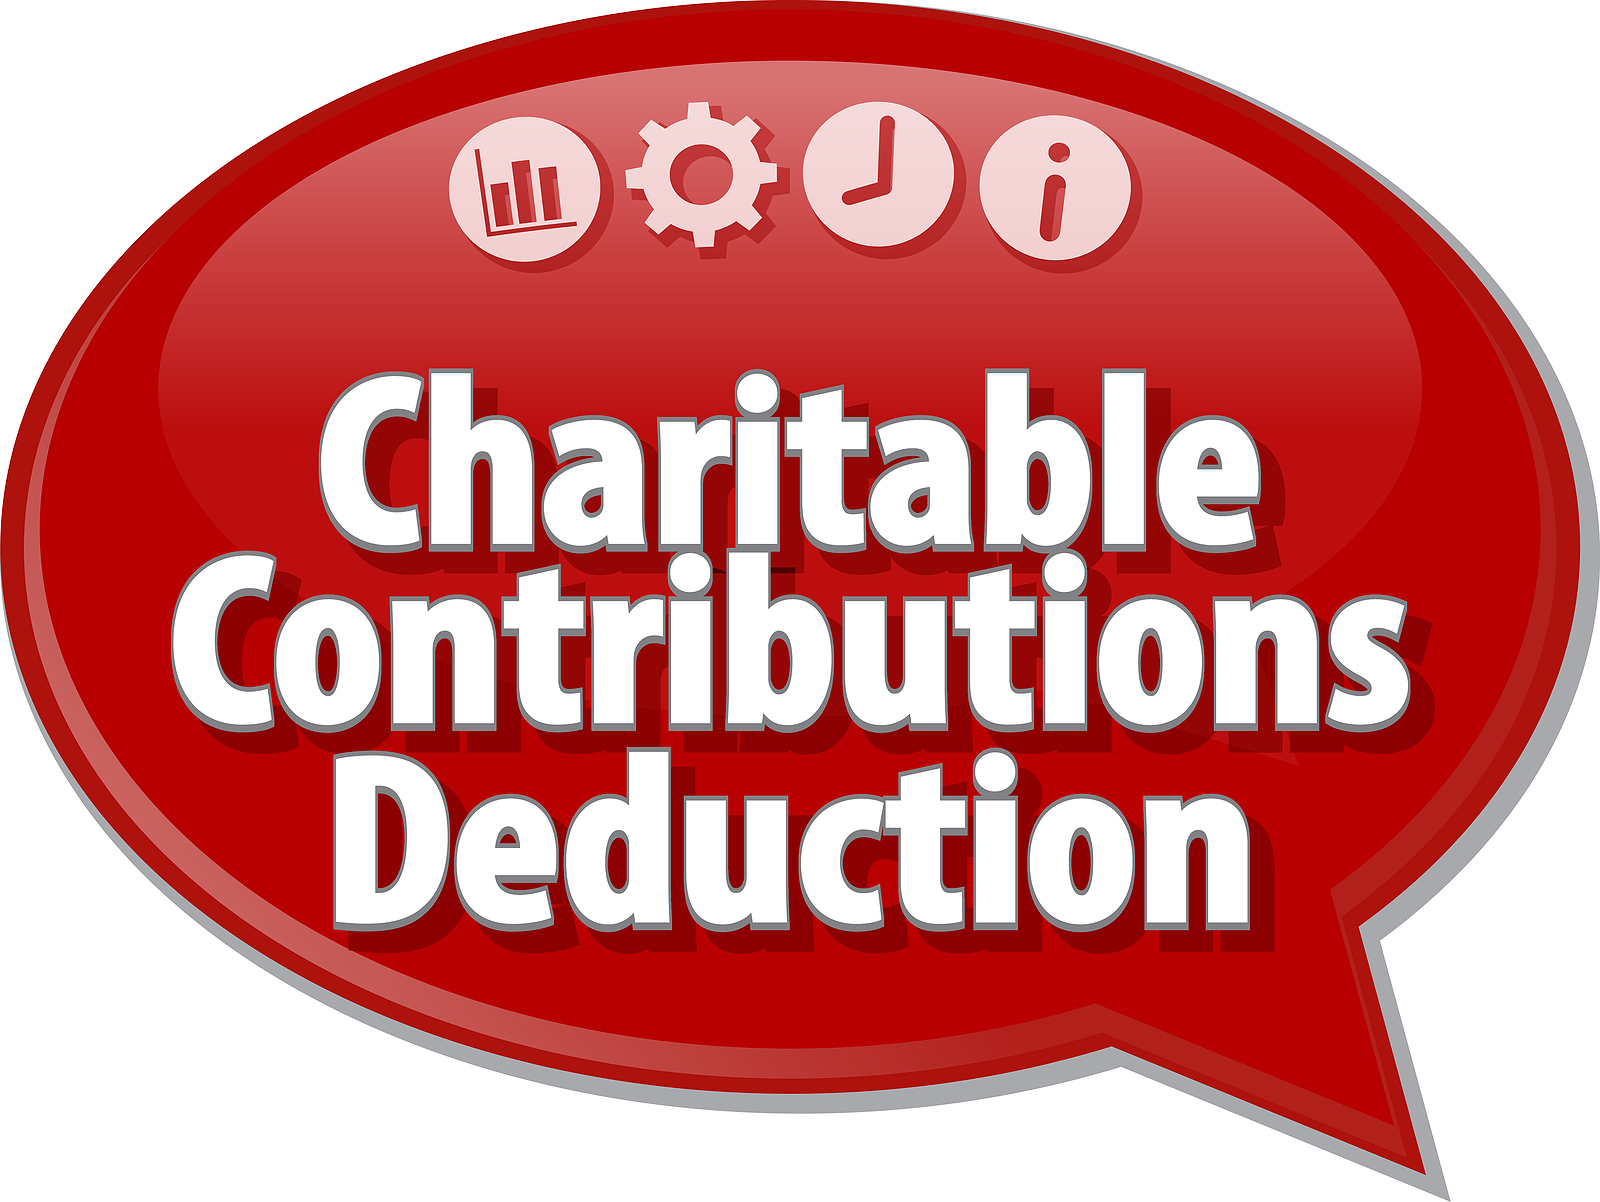 special-tax-deduction-for-2020-allows-donations-of-300-to-charity